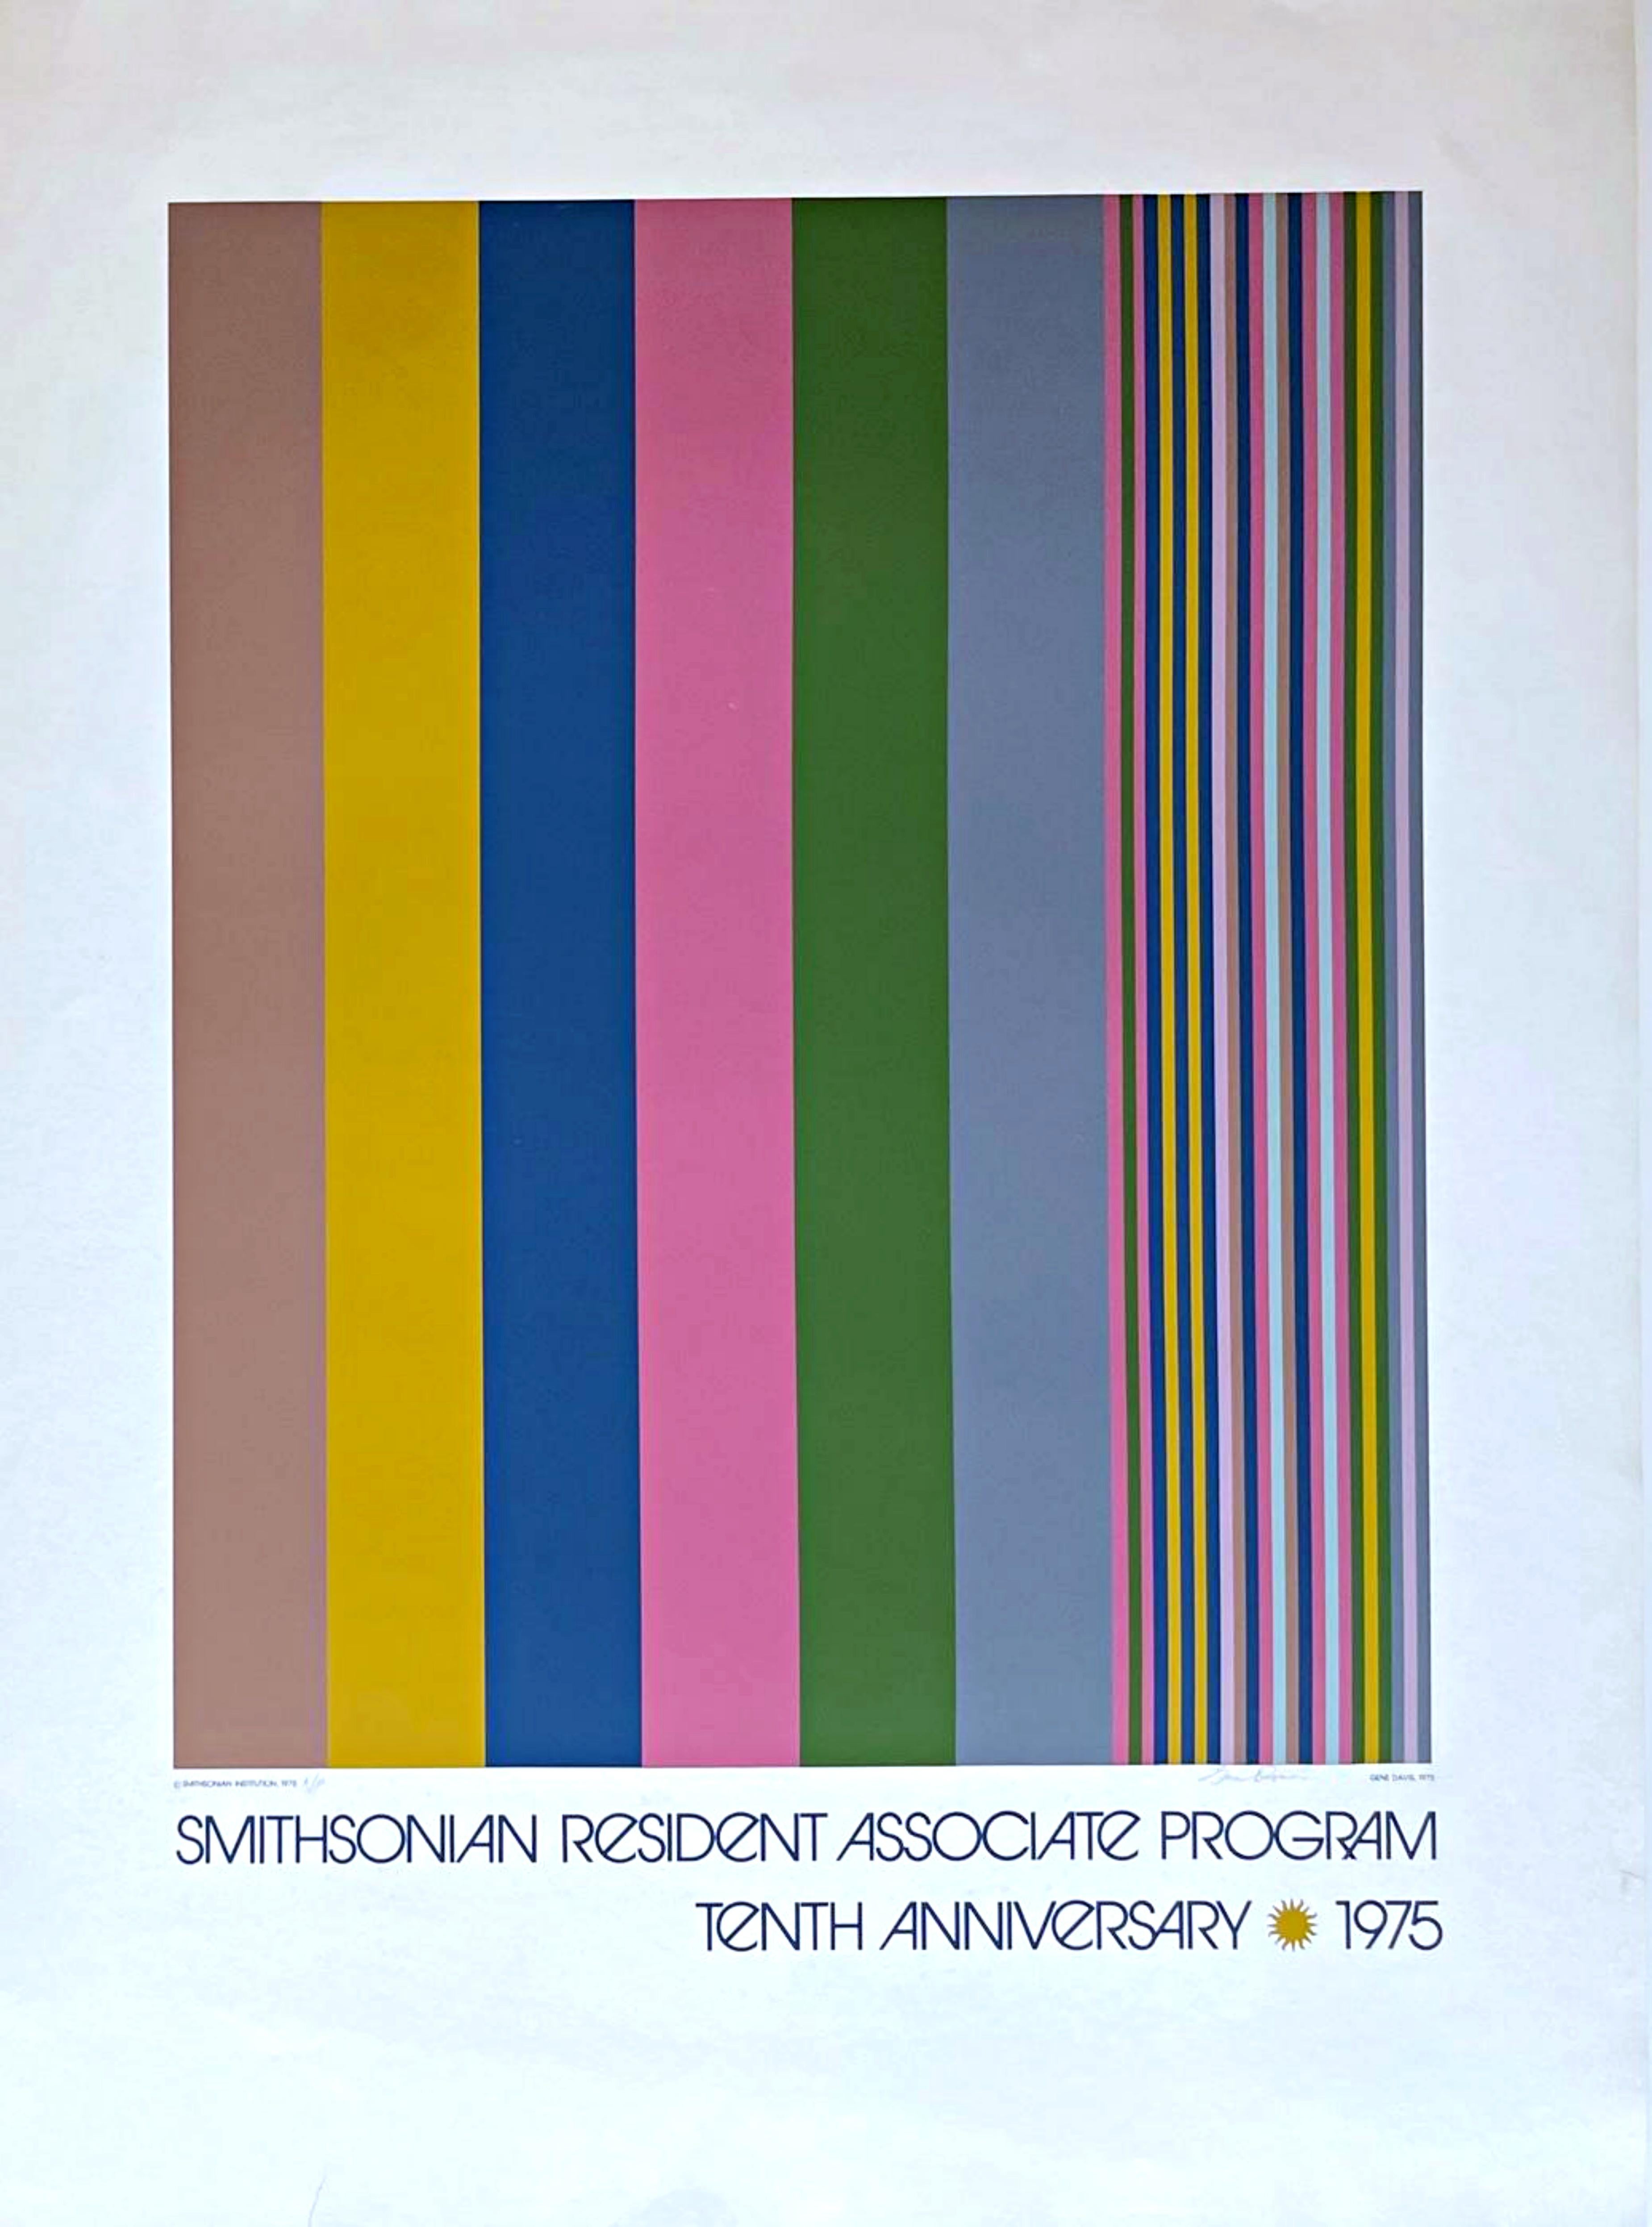 Gene Davis
Smithsonian Institution Resident Associate Program (Hand Signed & Numbered by Gene Davis), 1975
Offset lithograph poster (hand signed Artists Proof)
Pencil signed and annotated Artists Proof (AP) on the front
42 × 32 inches
Unframed
This